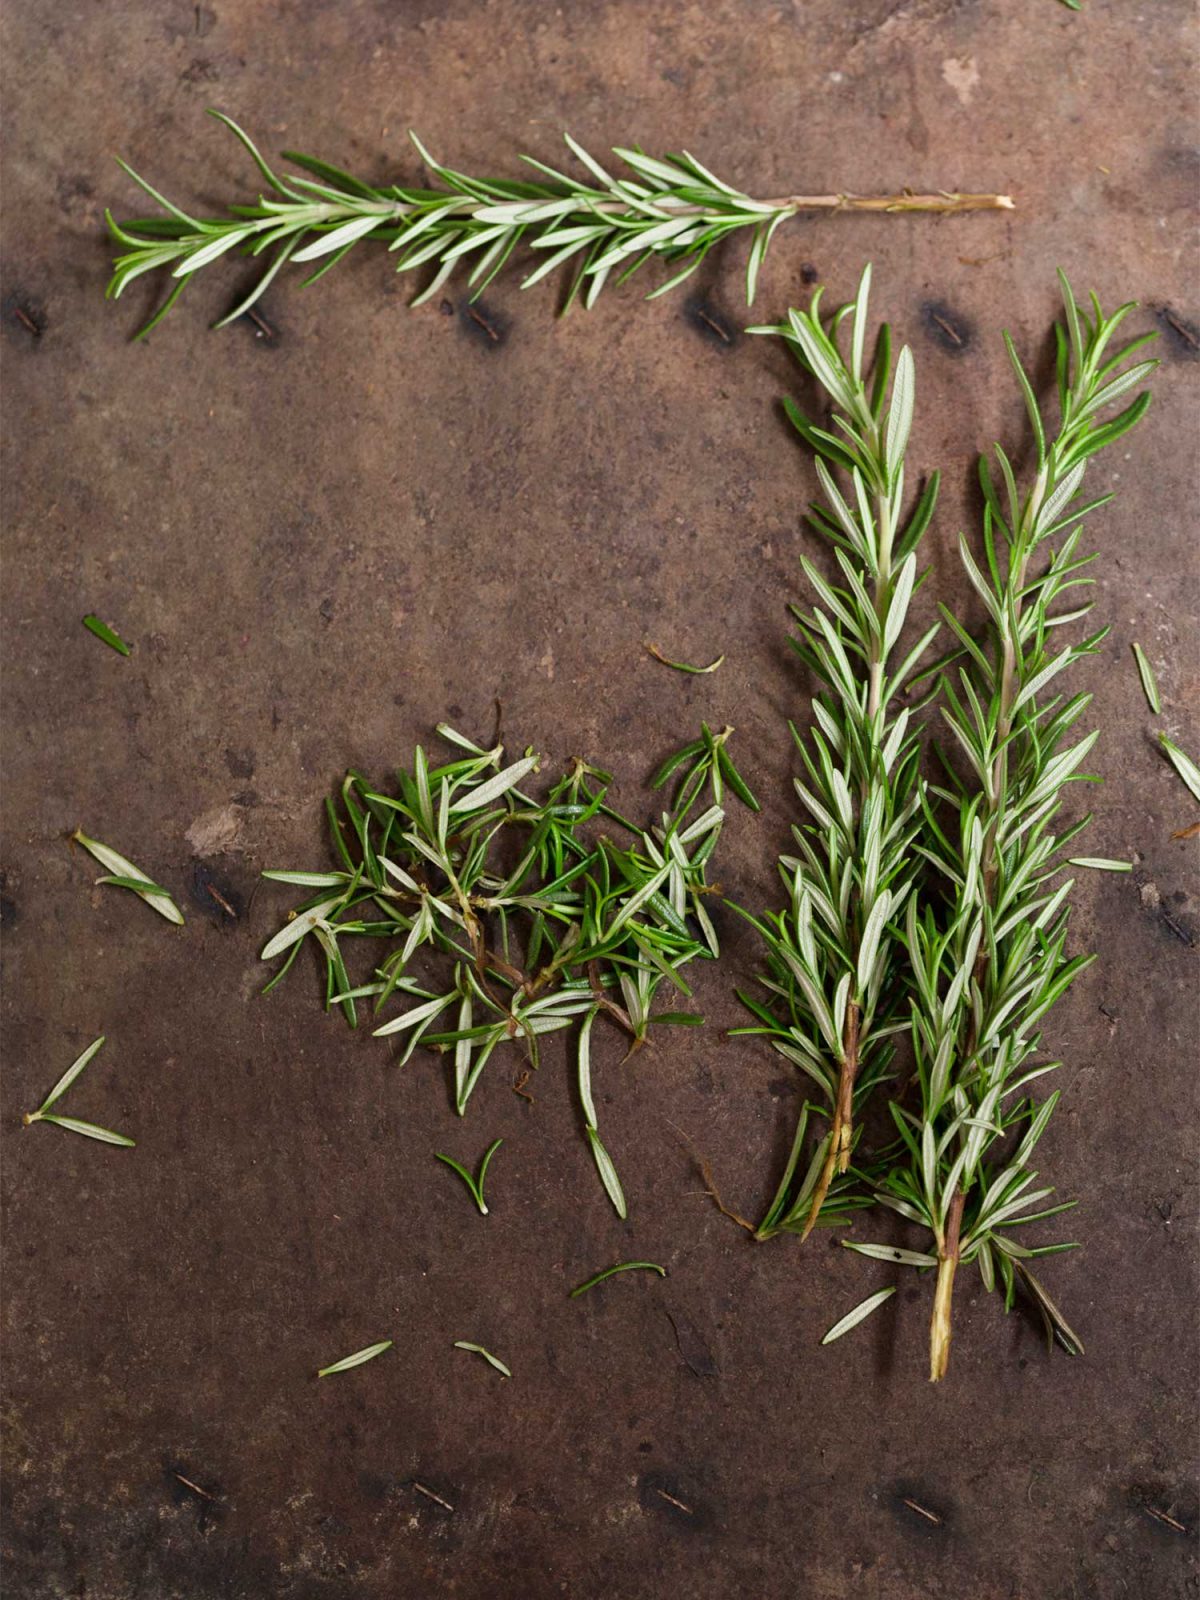 Rosemary, the herb, is among the top Kenyan exports